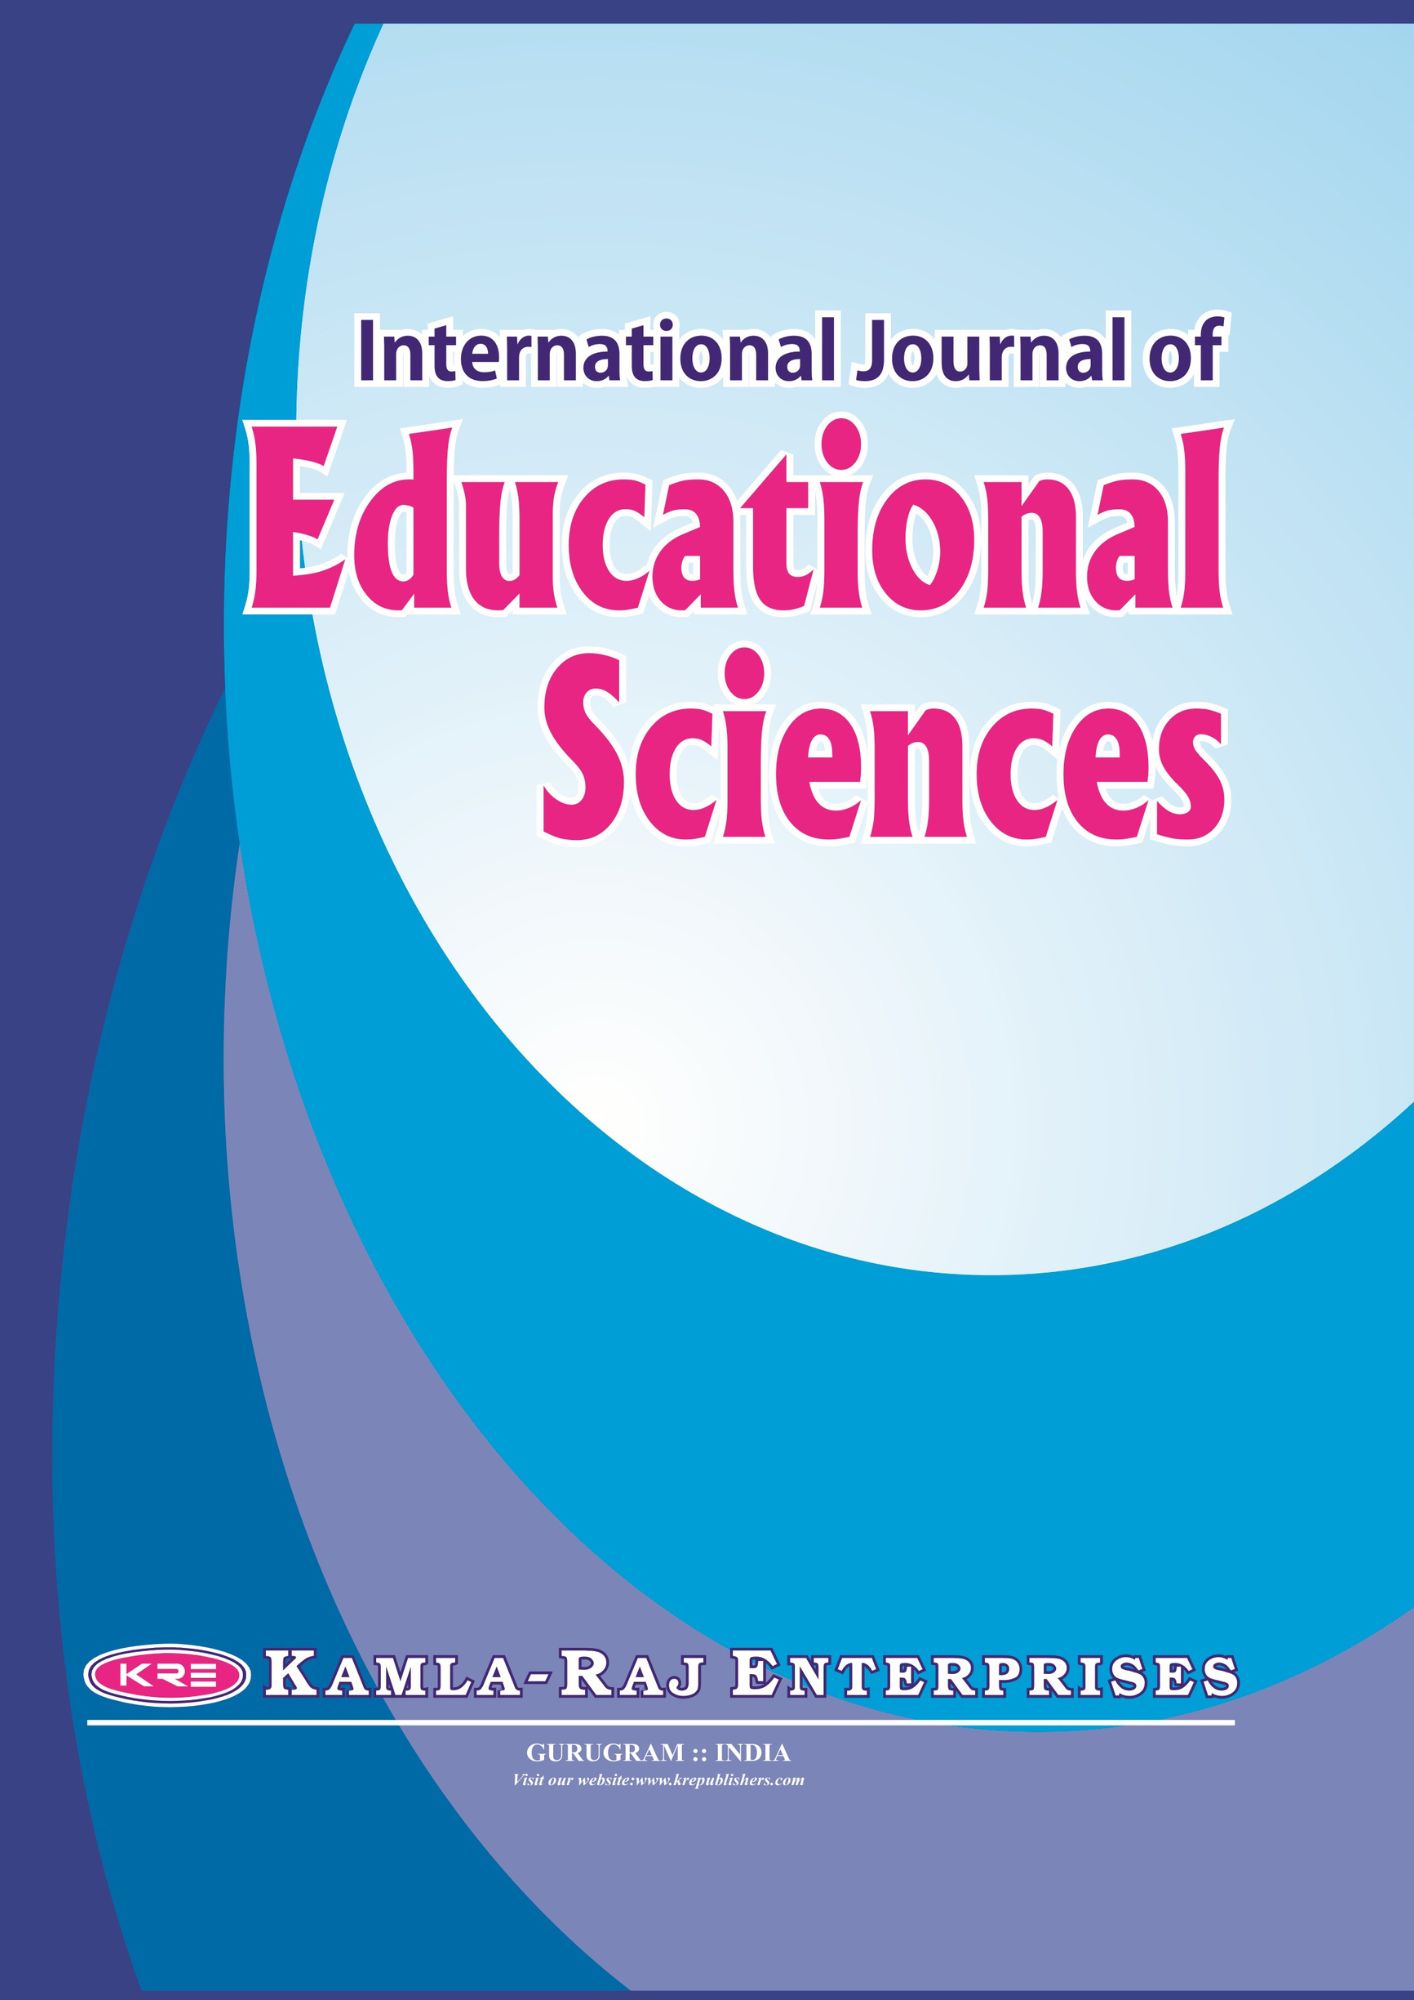 The Impact of Emotional Intelligence on Teachers’ Job Satisfaction: Mediating Role of Psychological Distress